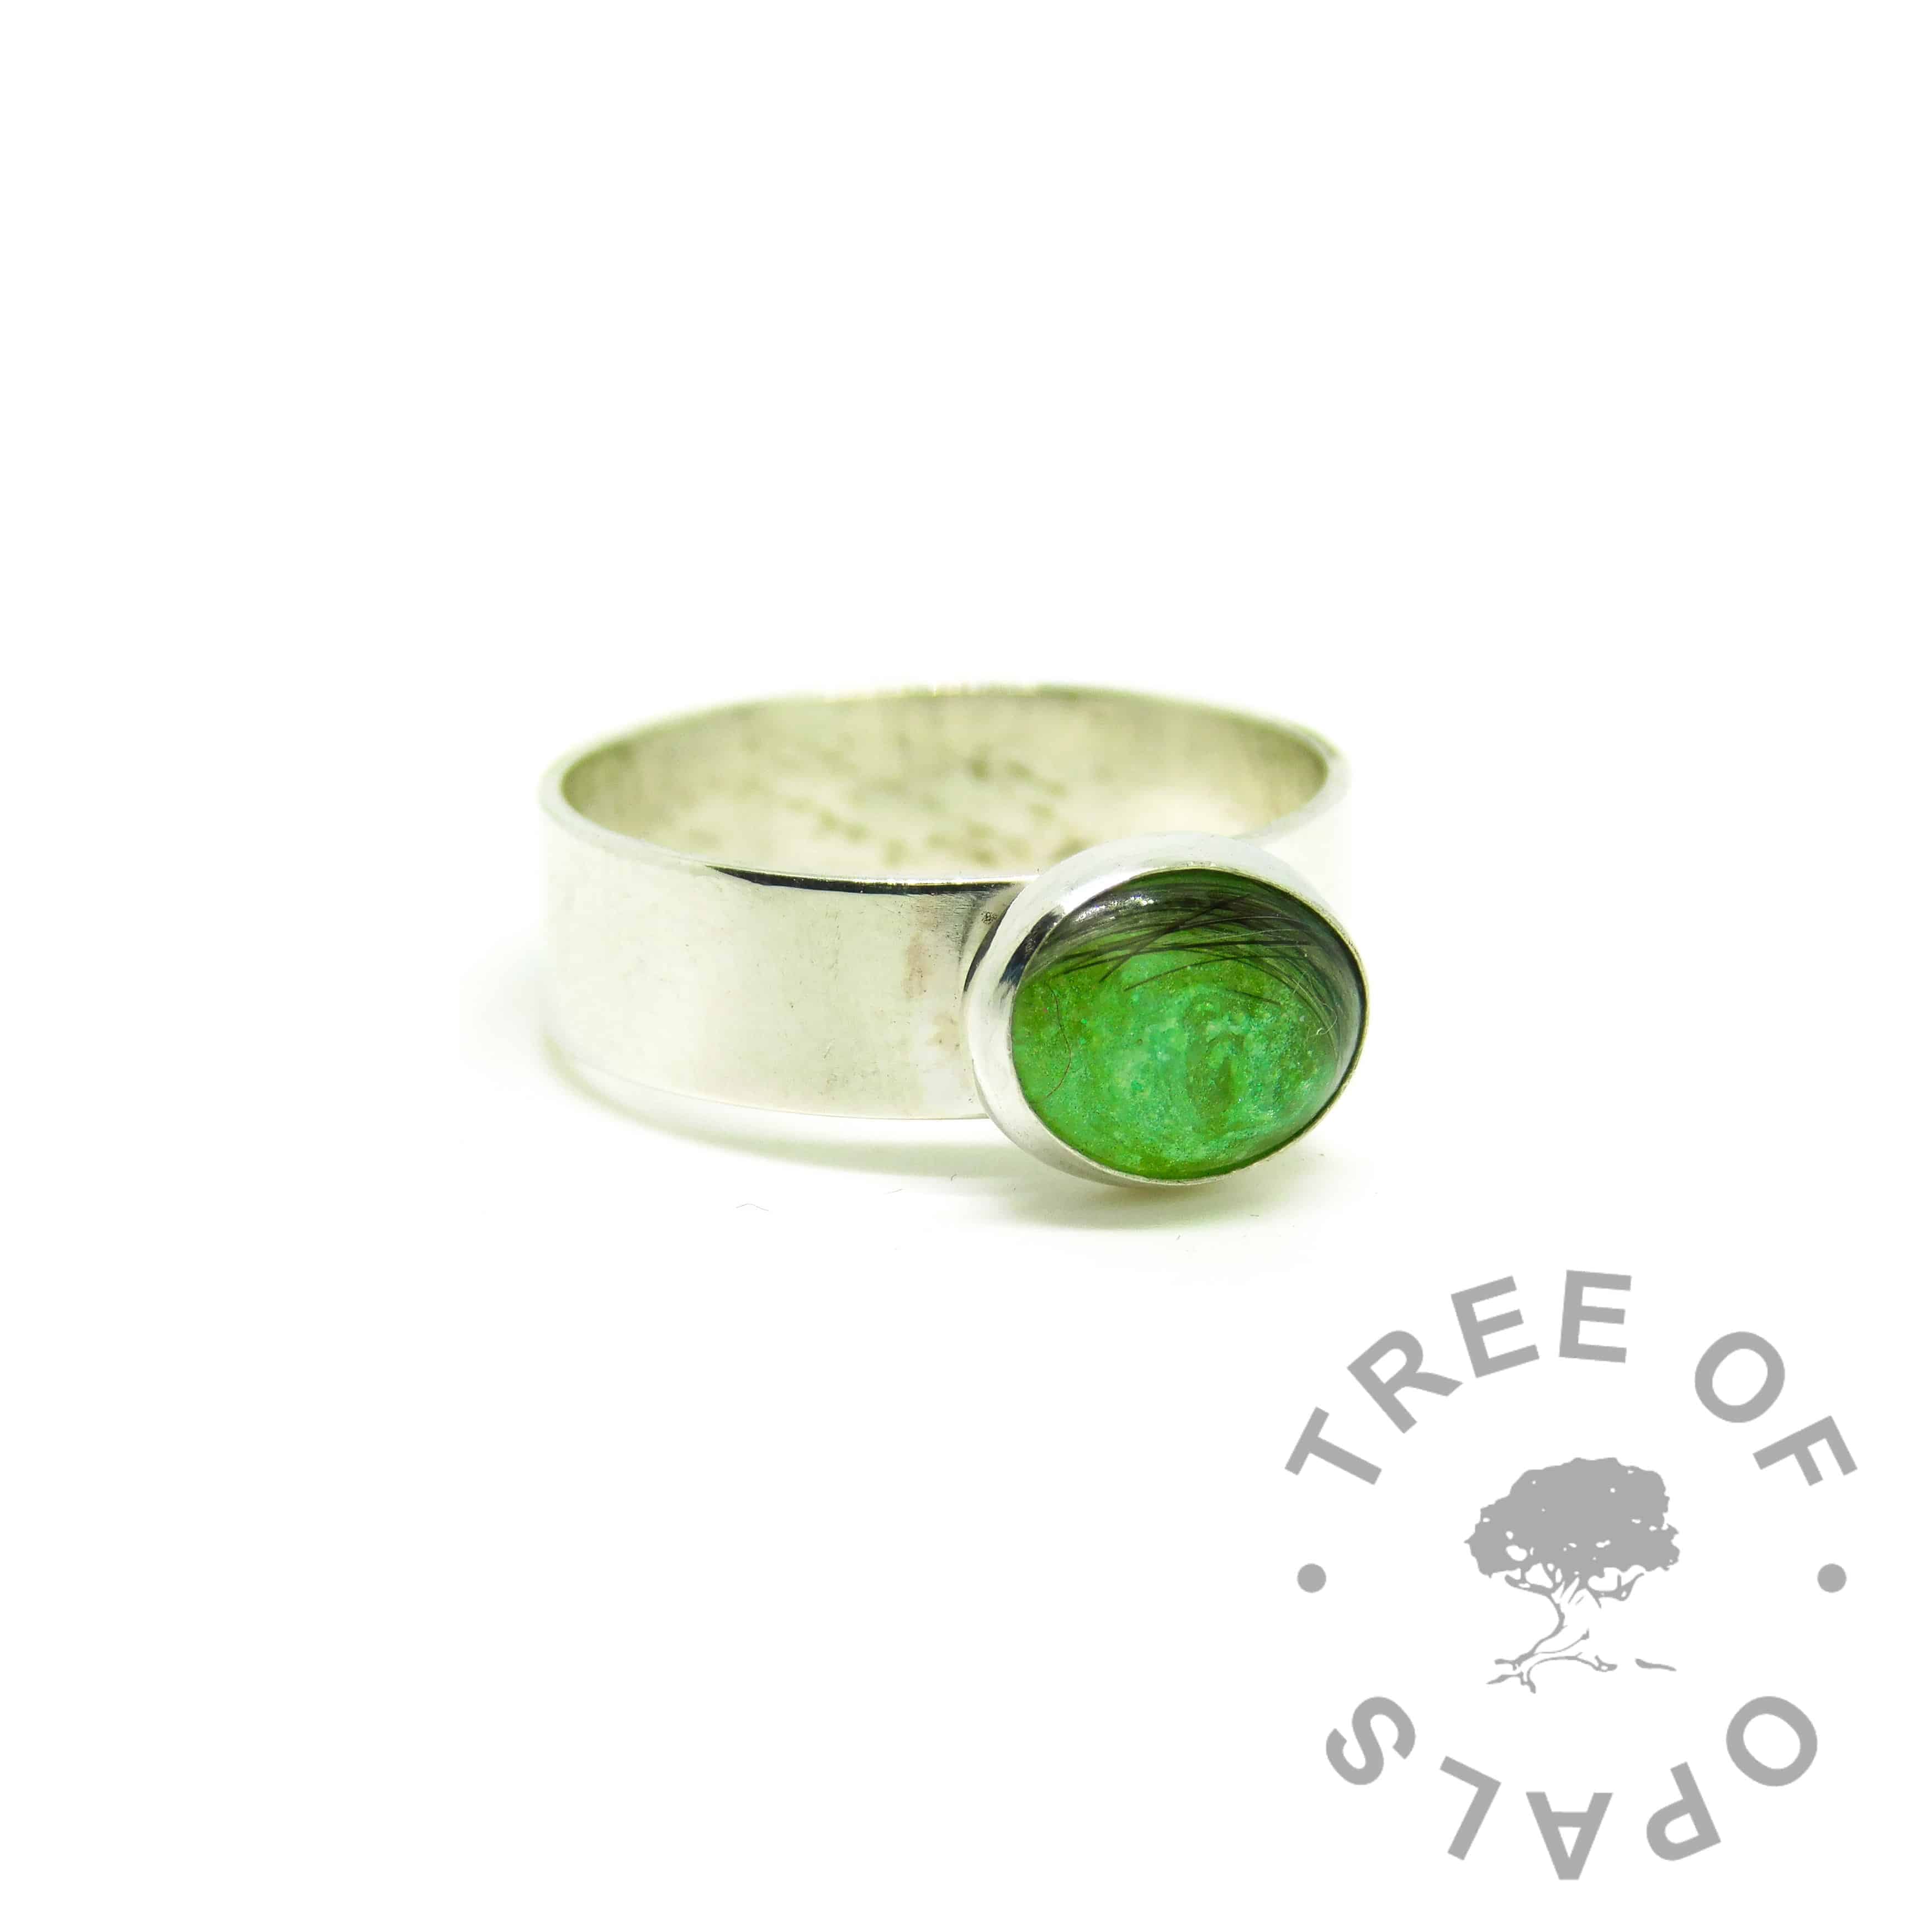 hair jewellery green ring, 6mm shiny Argentium silver band. Lock of hair with basilisk green resin sparkle mix